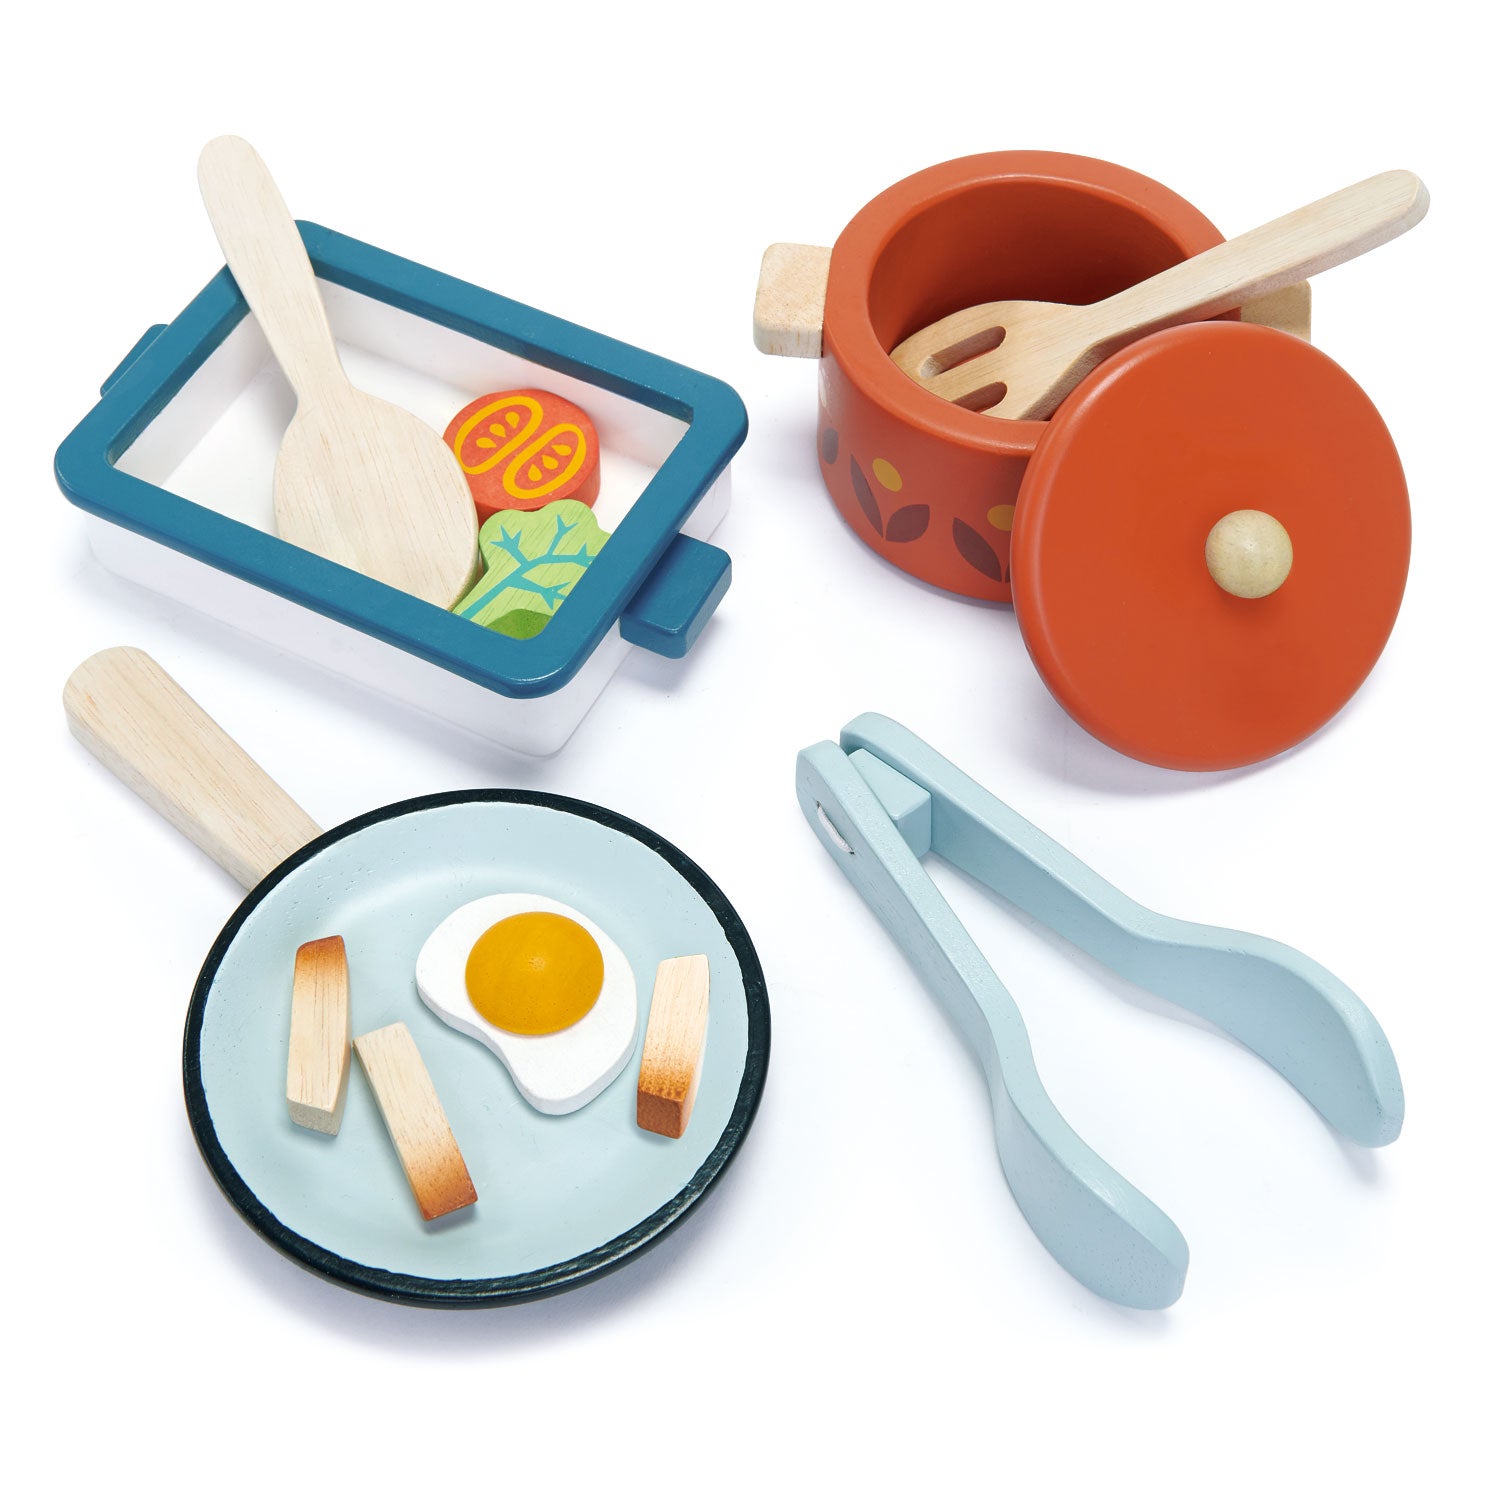 <p>Prepare dinner for your friends!</p>
<p>A retro-style casserole pot, a frying pan, a baking dish, 2 wooden cooking utensils and a handy pair of tongs. Stir the tomato and the vegetable, fry the egg with the 3 chips and pop it all in the oven dish to keep warm.</p>
<p>Age range: 3 Years And Older  </p>
<p>Product size: 14.96 x 9.84 x 3.15”  </p>
<p> Weight: 1.1 lbs</p>
<p><a href="https://www.dropbox.com/s/z662m69v32oeoek/TL8241%20Pots%20and%20Pans%20Printable.pdf?dl=0" title="Pots and Pans Printable"><img src="https://cdn.shopify.com/s/files/1/1083/1780/files/TL8241-Pots-and-Pans-Printable-dl_480x480.jpg?v=1597916706" alt="Pots and Pans Printable"></a></p>
<p><a href="https://www.dropbox.com/s/14m23bq0feudddr/TL%20Pasta%20Printable.pdf?dl=0"><strong>Download Pasta Printable</strong></a></p>
